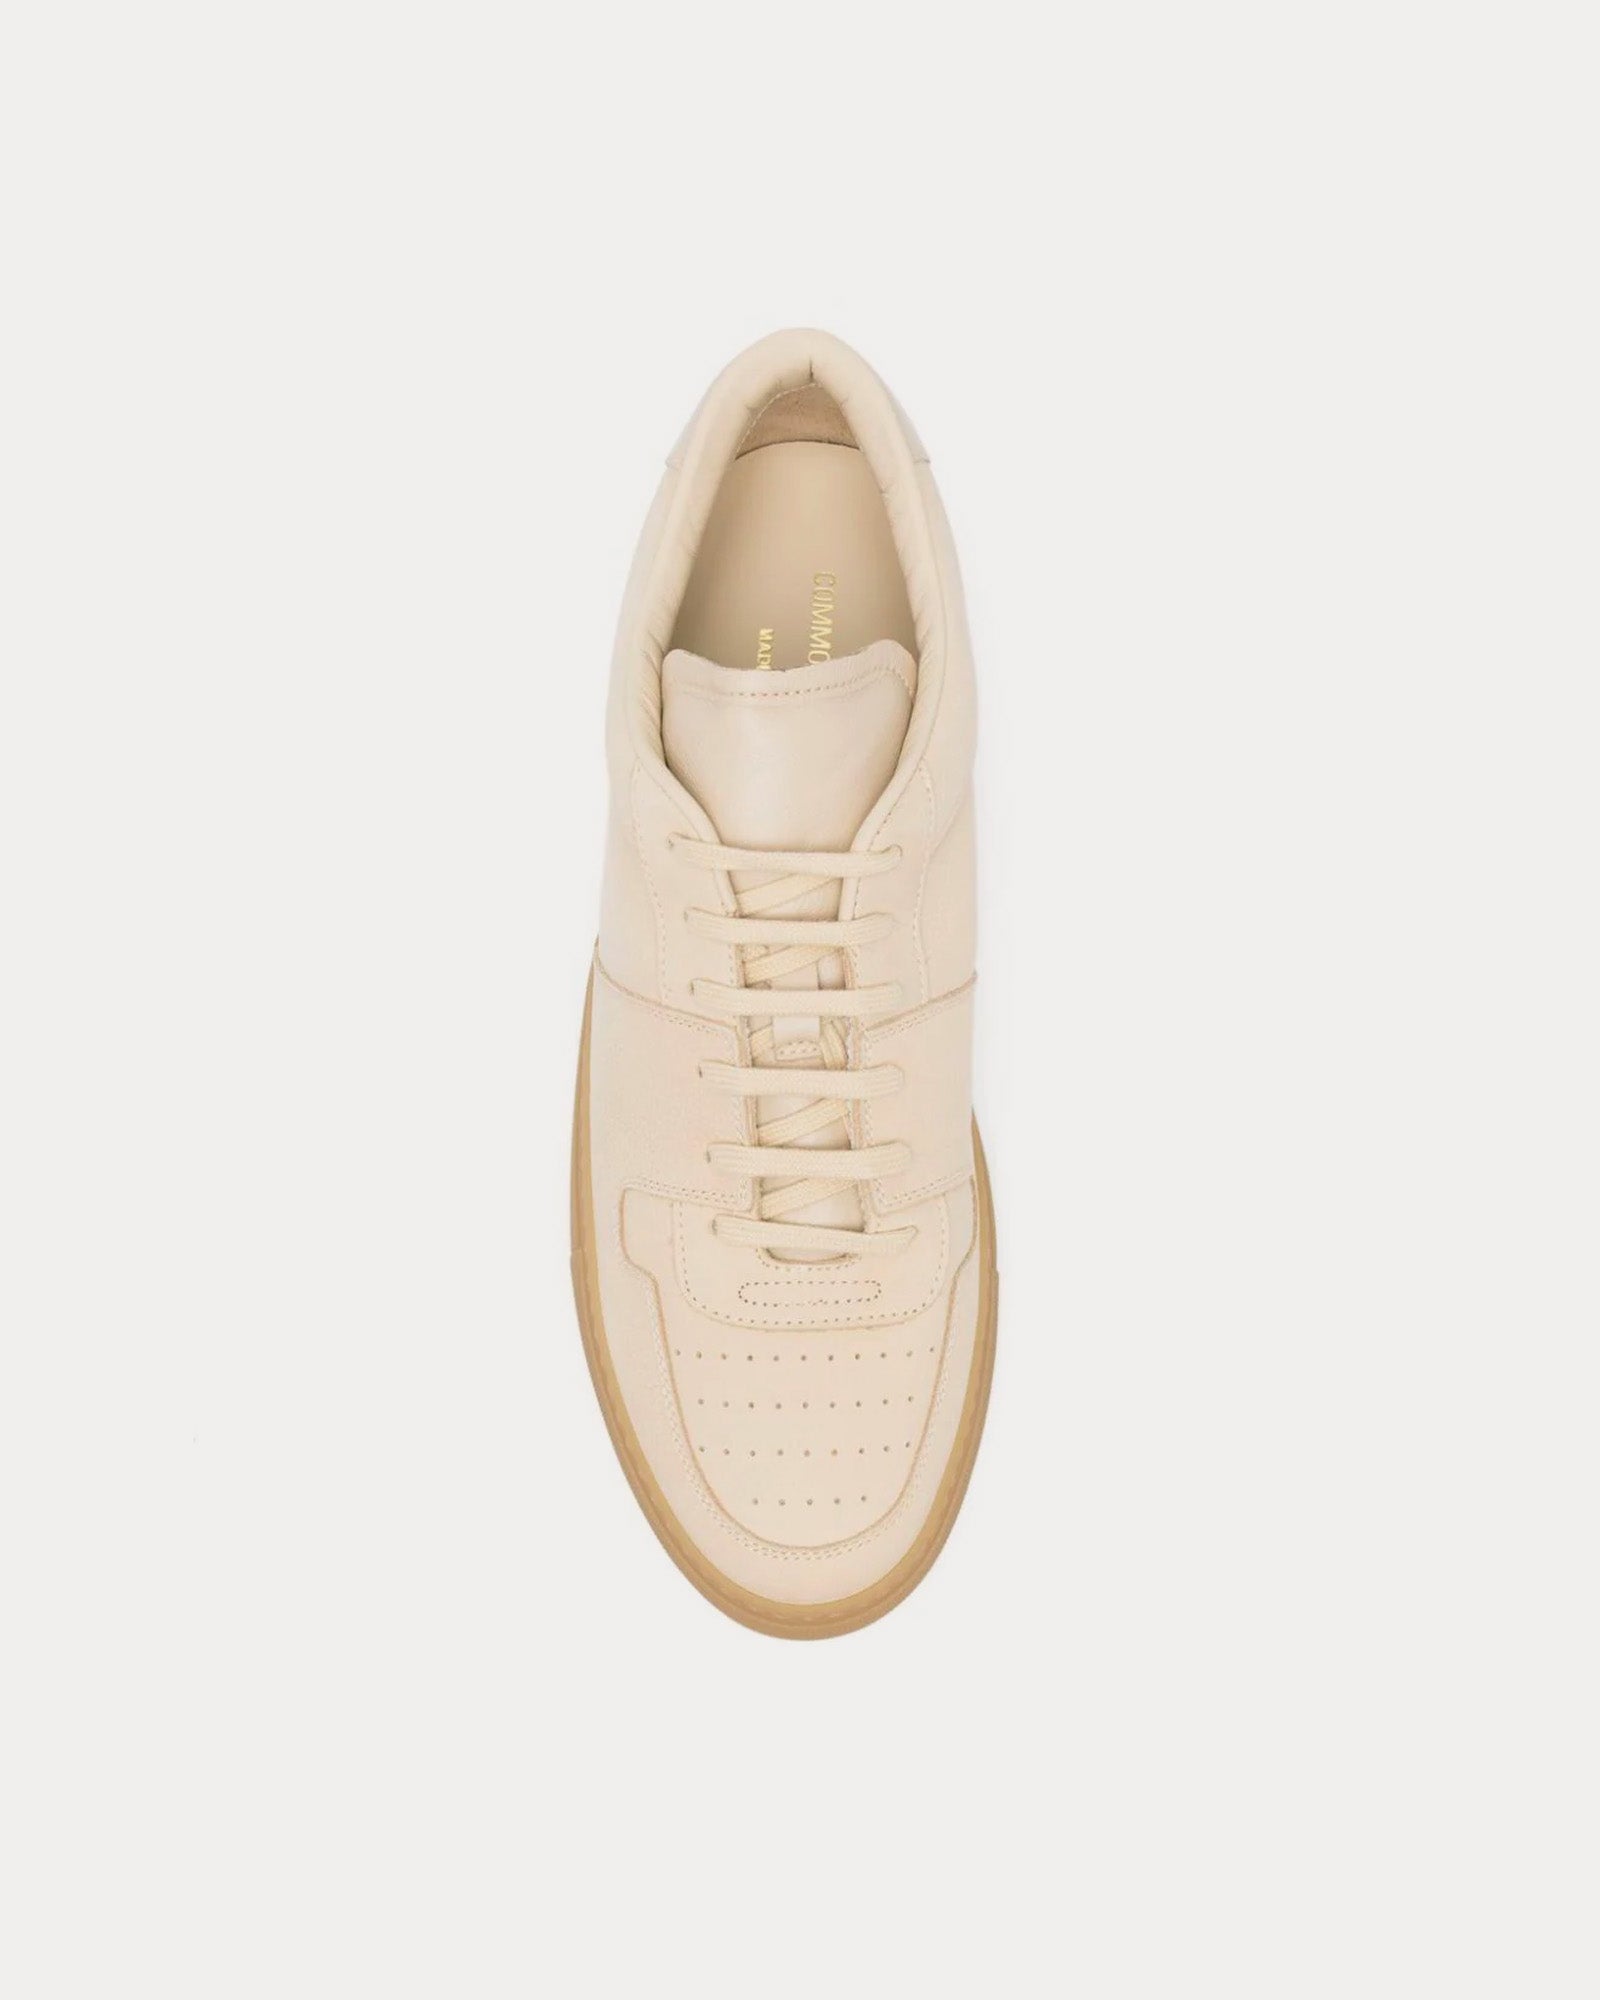 Common Projects - Decades Calf-Leather Sand Beige Low Top Sneakers